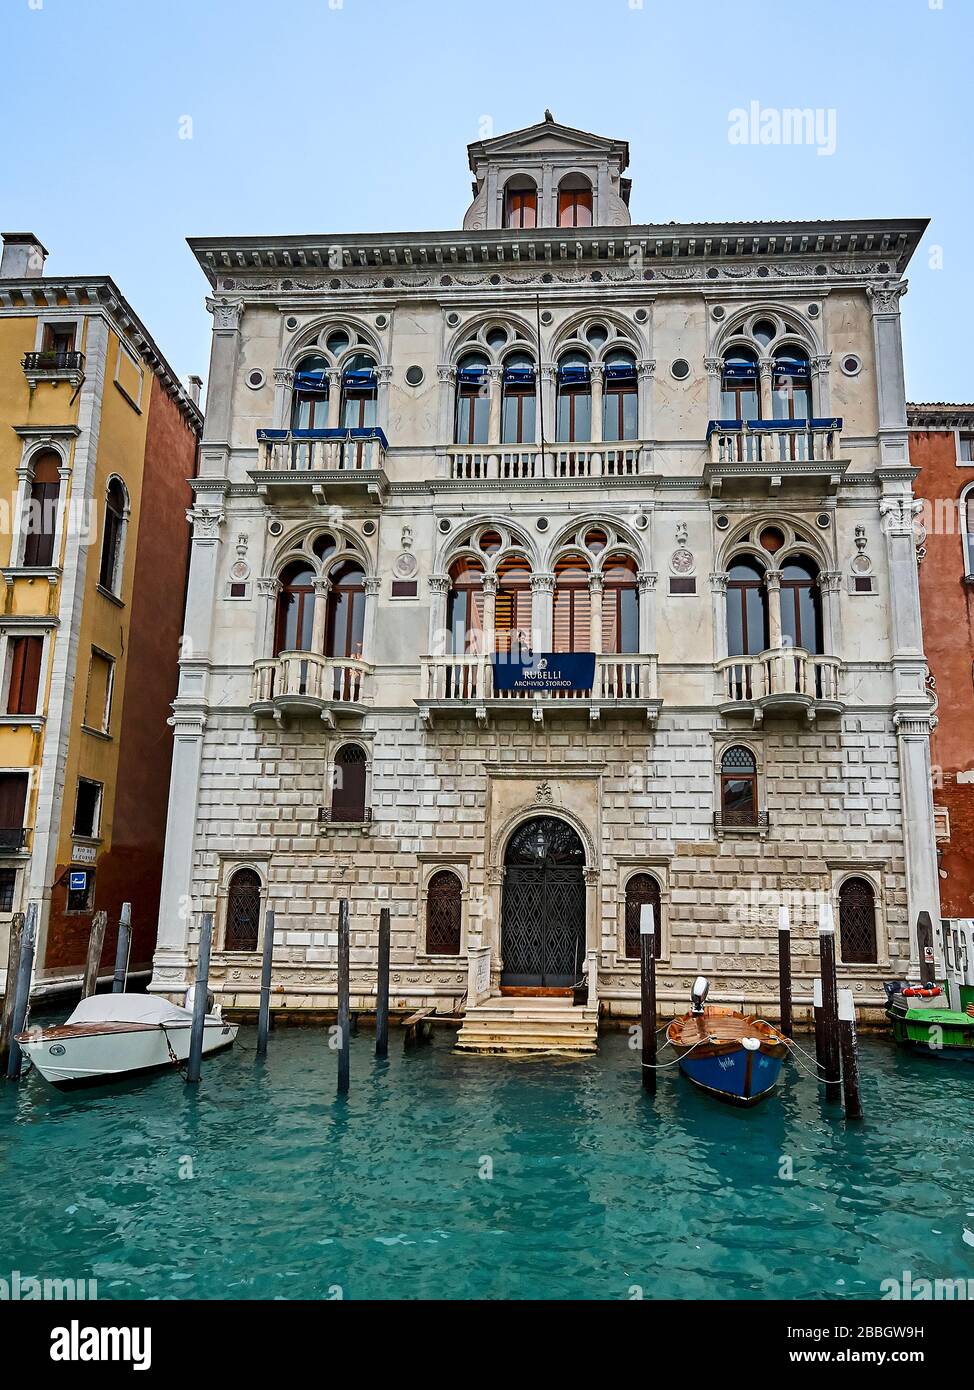 Venice, the capital of northern Italy’s Veneto region, is built on 118 small islands in a lagoon in the Adriatic Sea. It has no roads, just canals, li Stock Photo